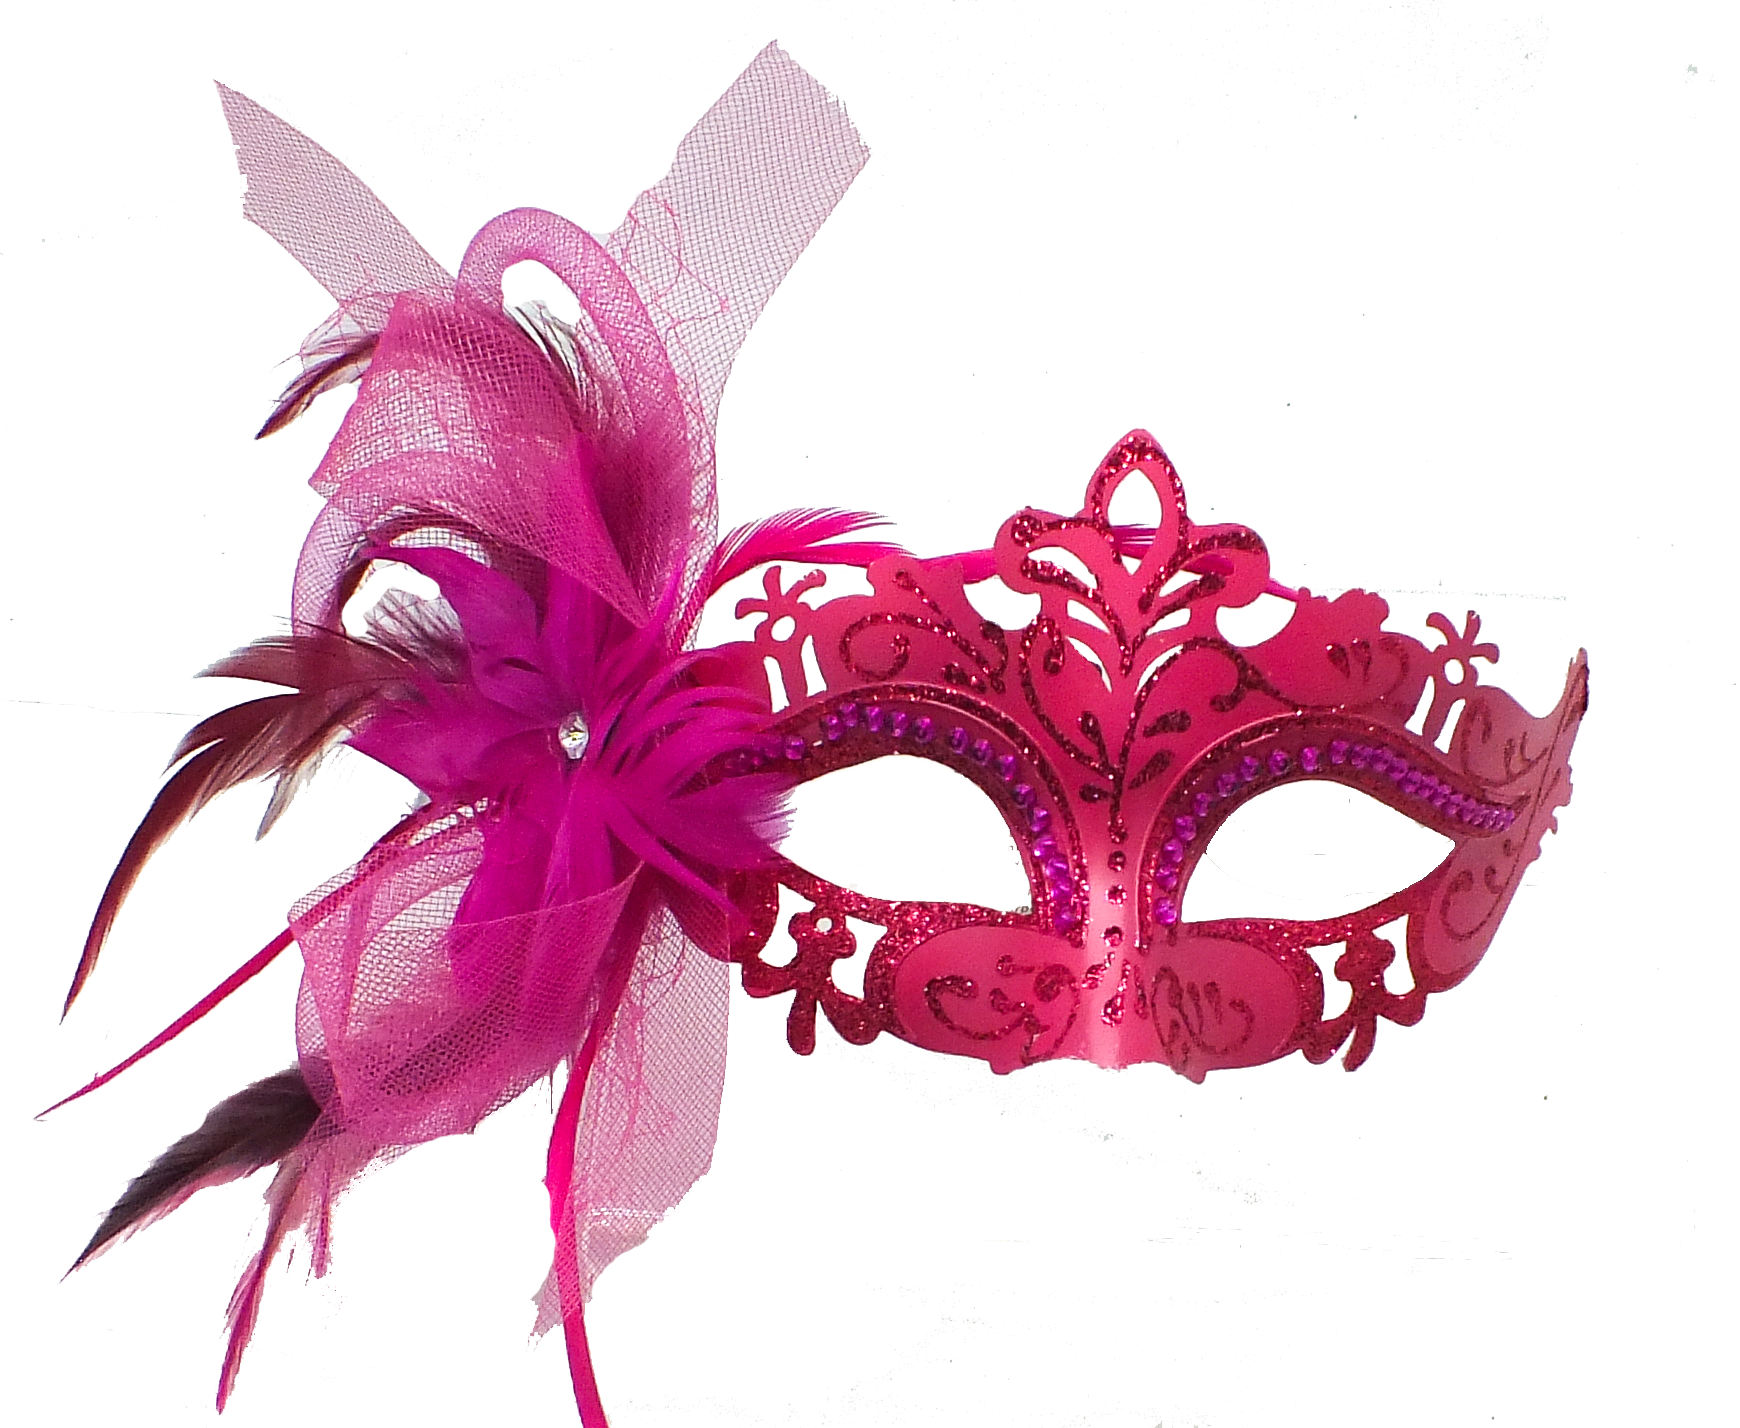 Hot Pink Feathers with Silver Sequins Around The Eyes (Each) – Mardi Gras  Spot